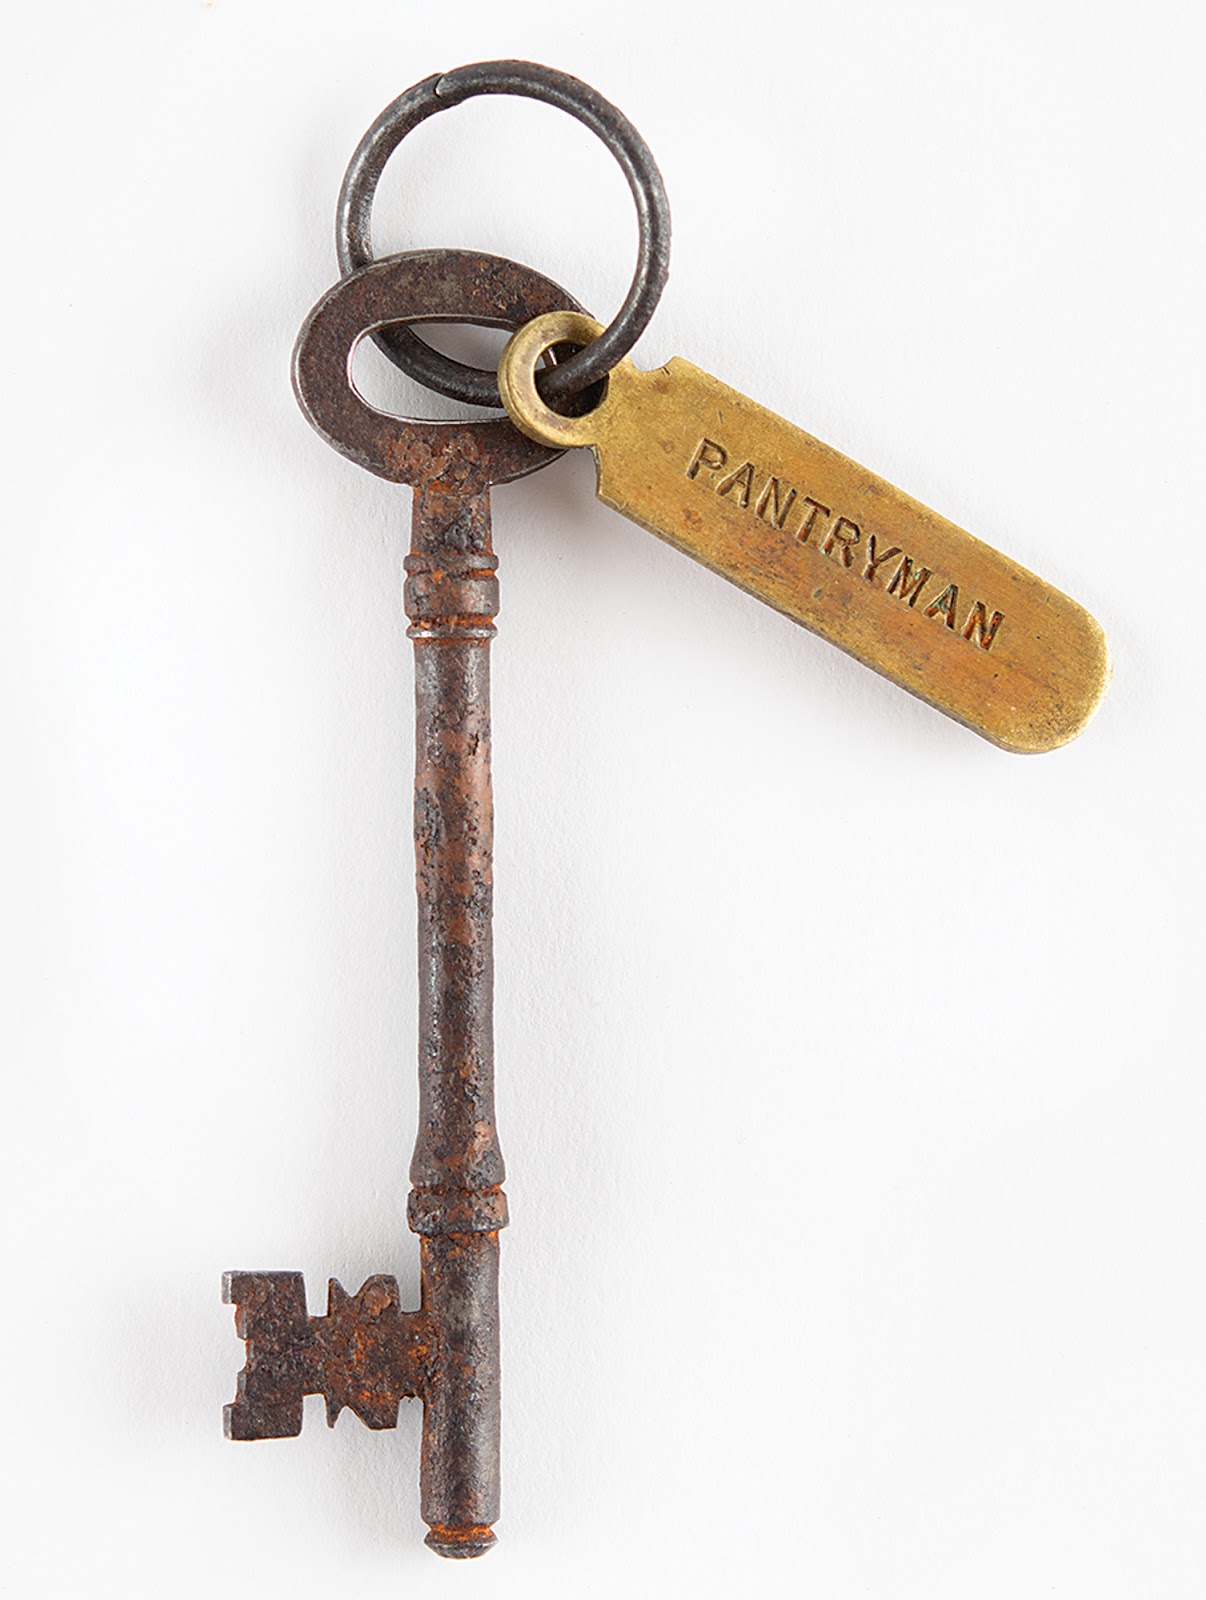 Close-up of the rusty Titanic key recovered from Deeble’s body, featuring the metallic tag that says “Pantryman.”